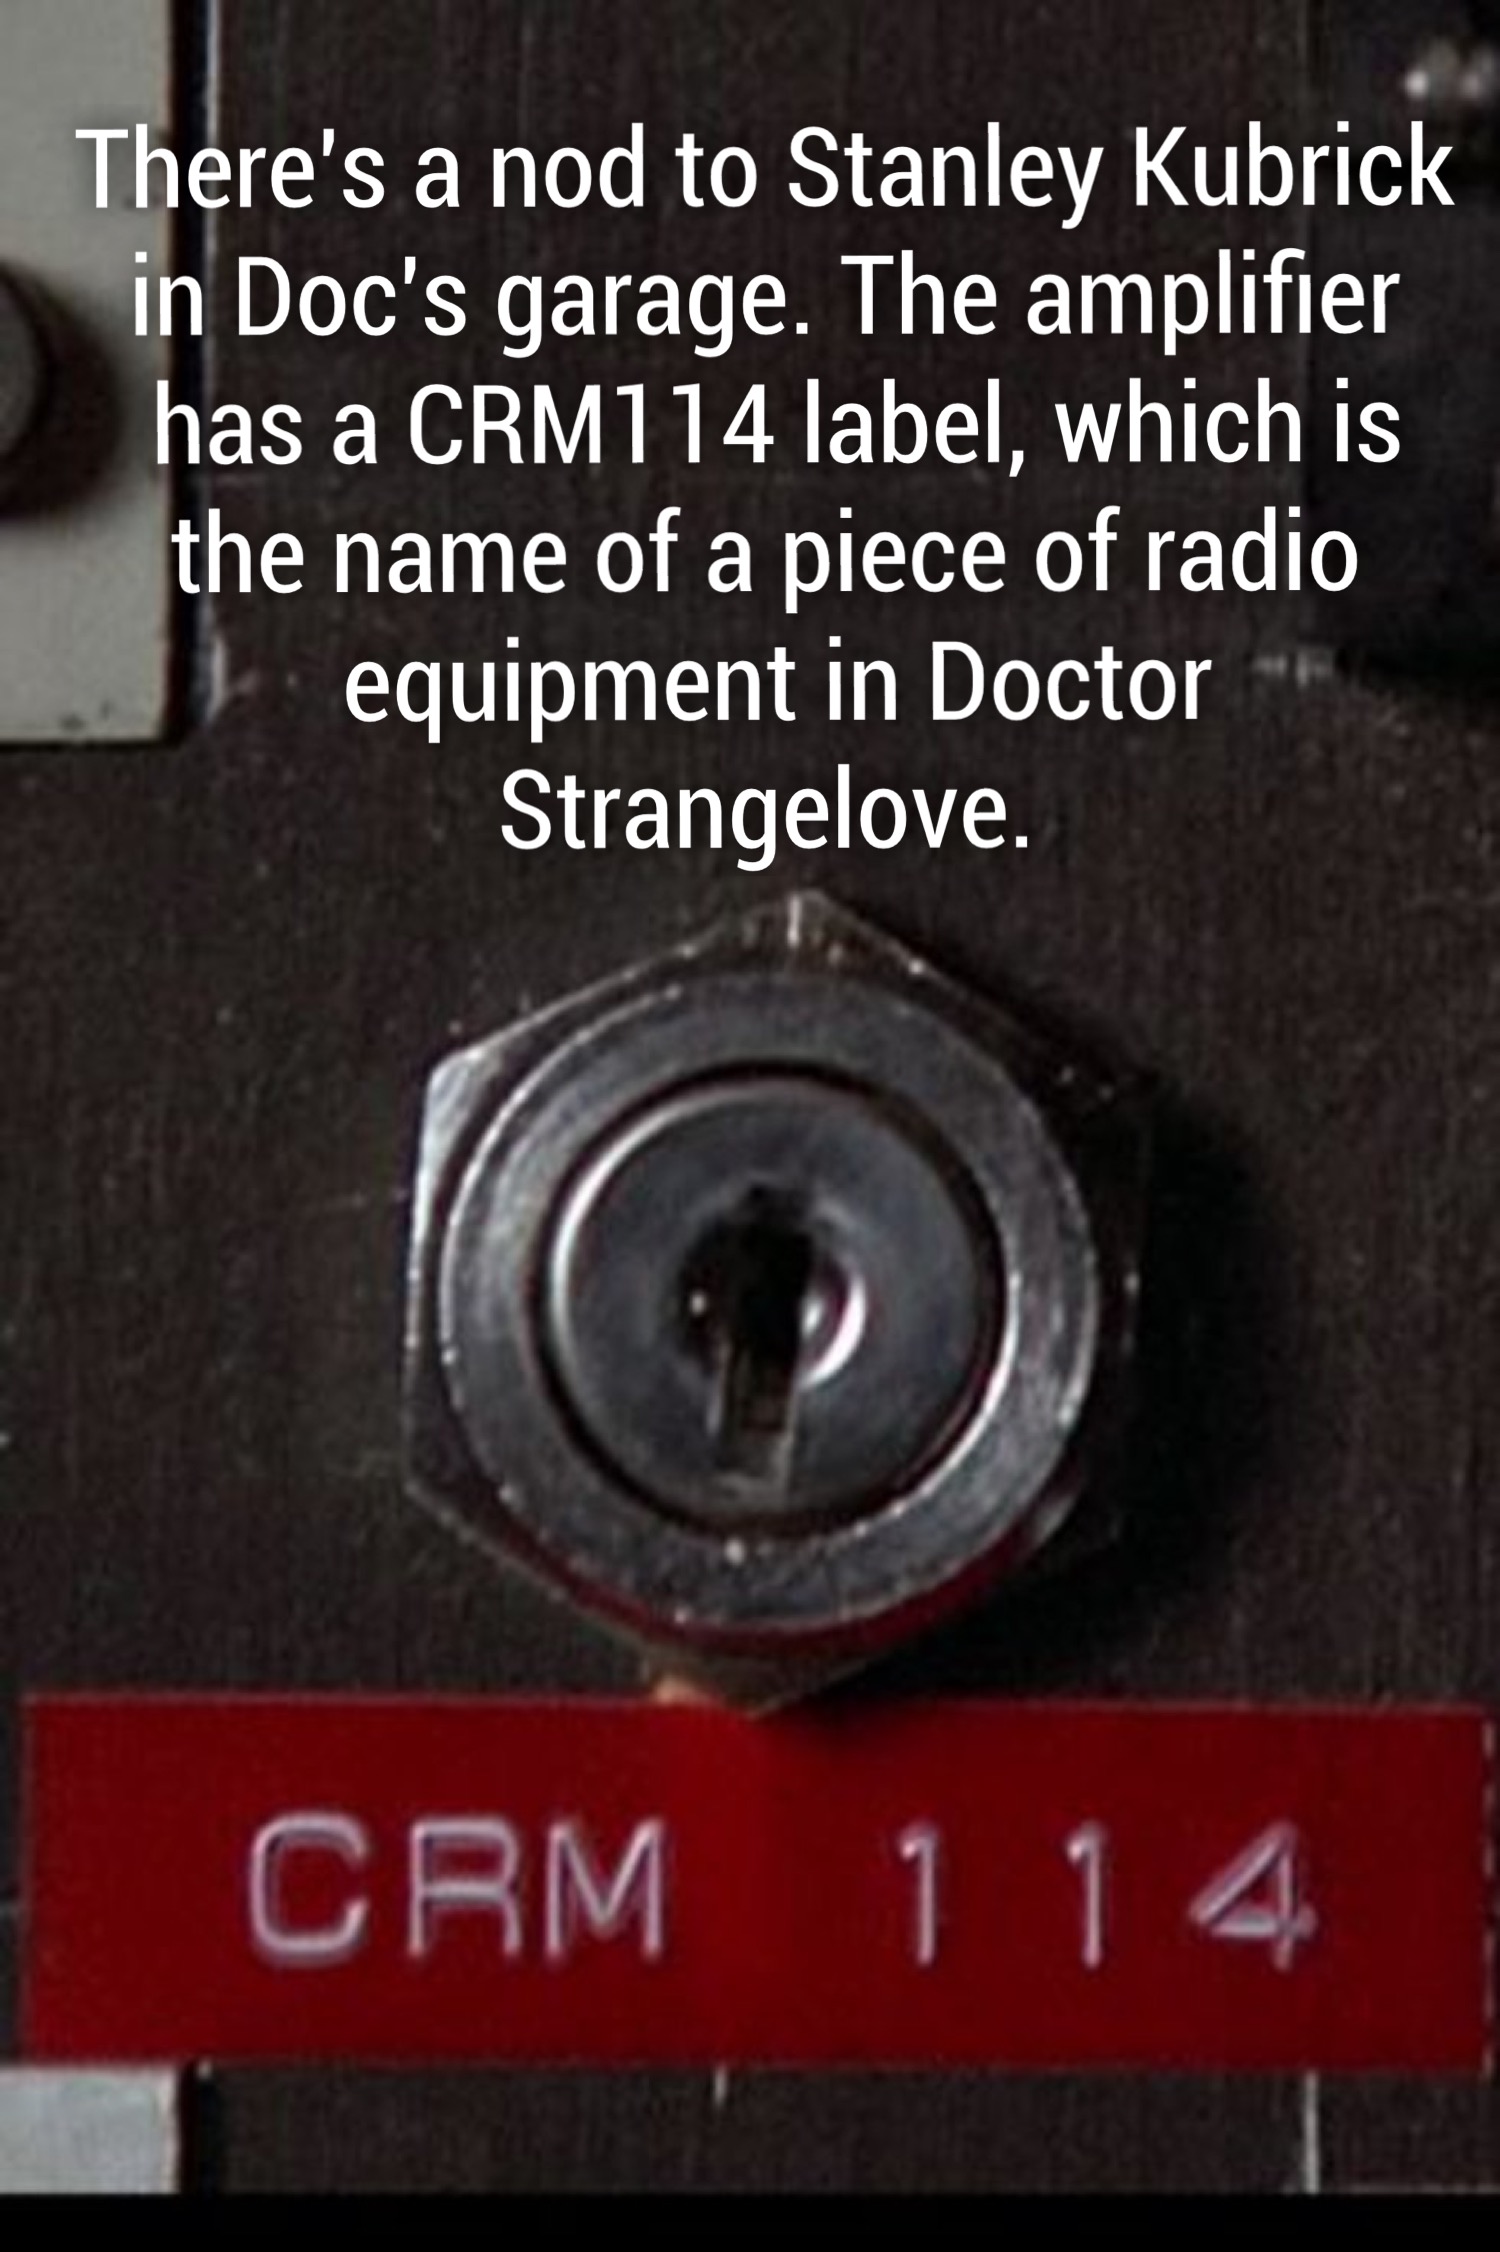 close up - There's a nod to Stanley Kubrick in Doc's garage. The amplifier has a CRM114 label, which is the name of a piece of radio equipment in Doctor Strangelove. Crm 1 14,